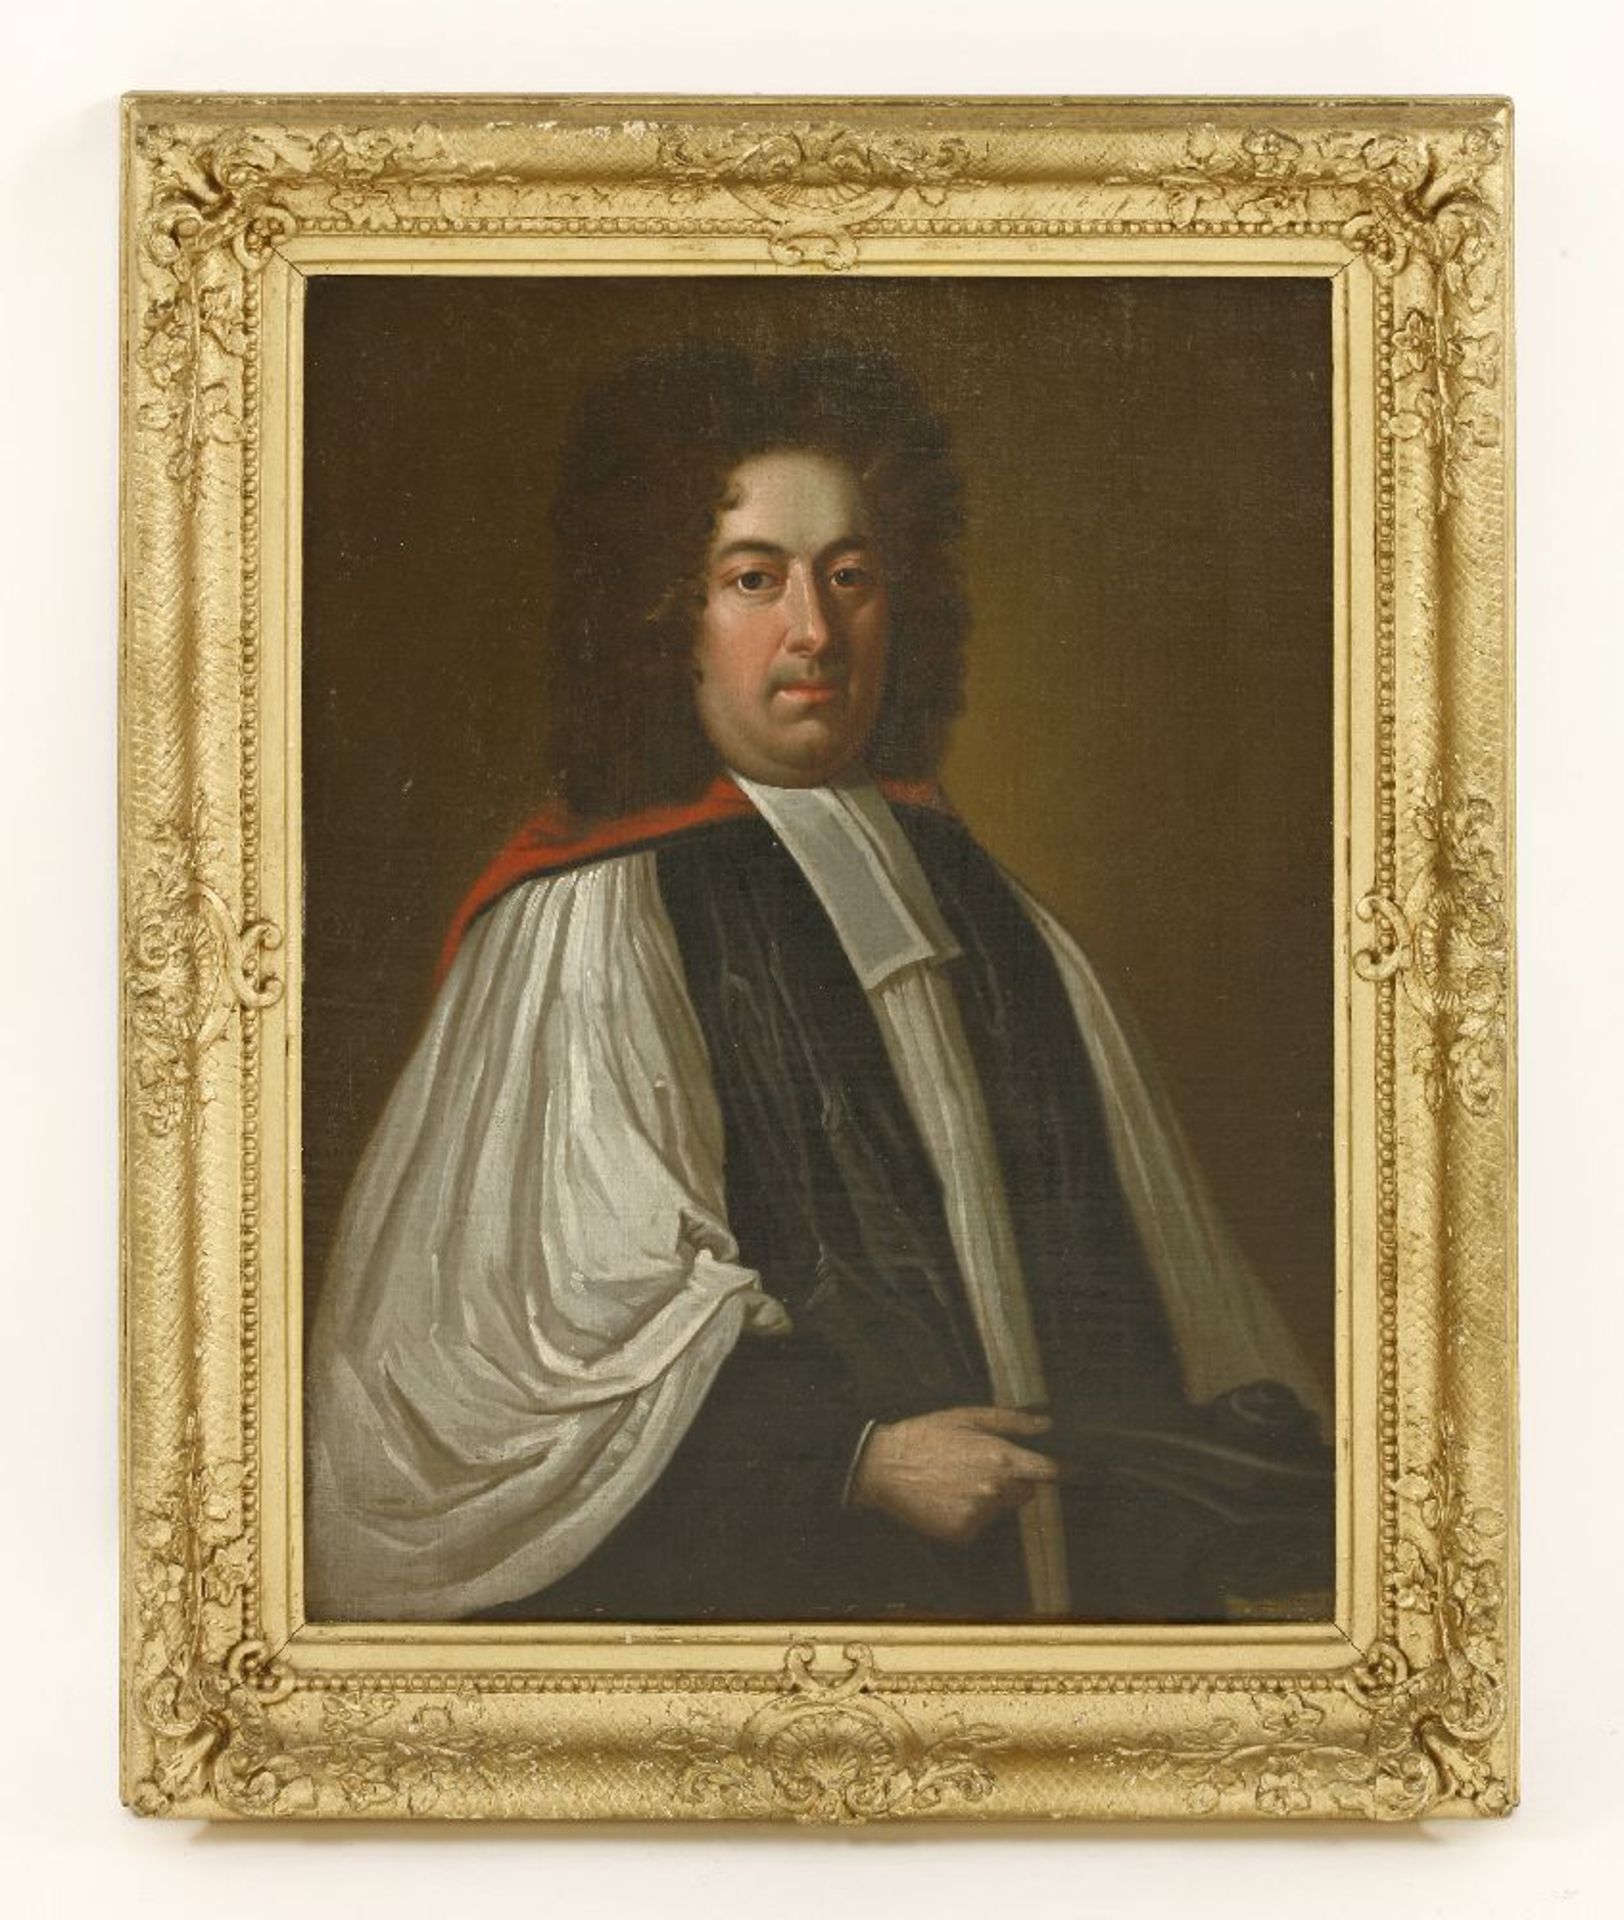 English School, c.1700PORTRAIT OF NATHANIAL ELLISON, VICAR OF NEWCASTLE 1695, ARCHDEACON OF - Image 2 of 3